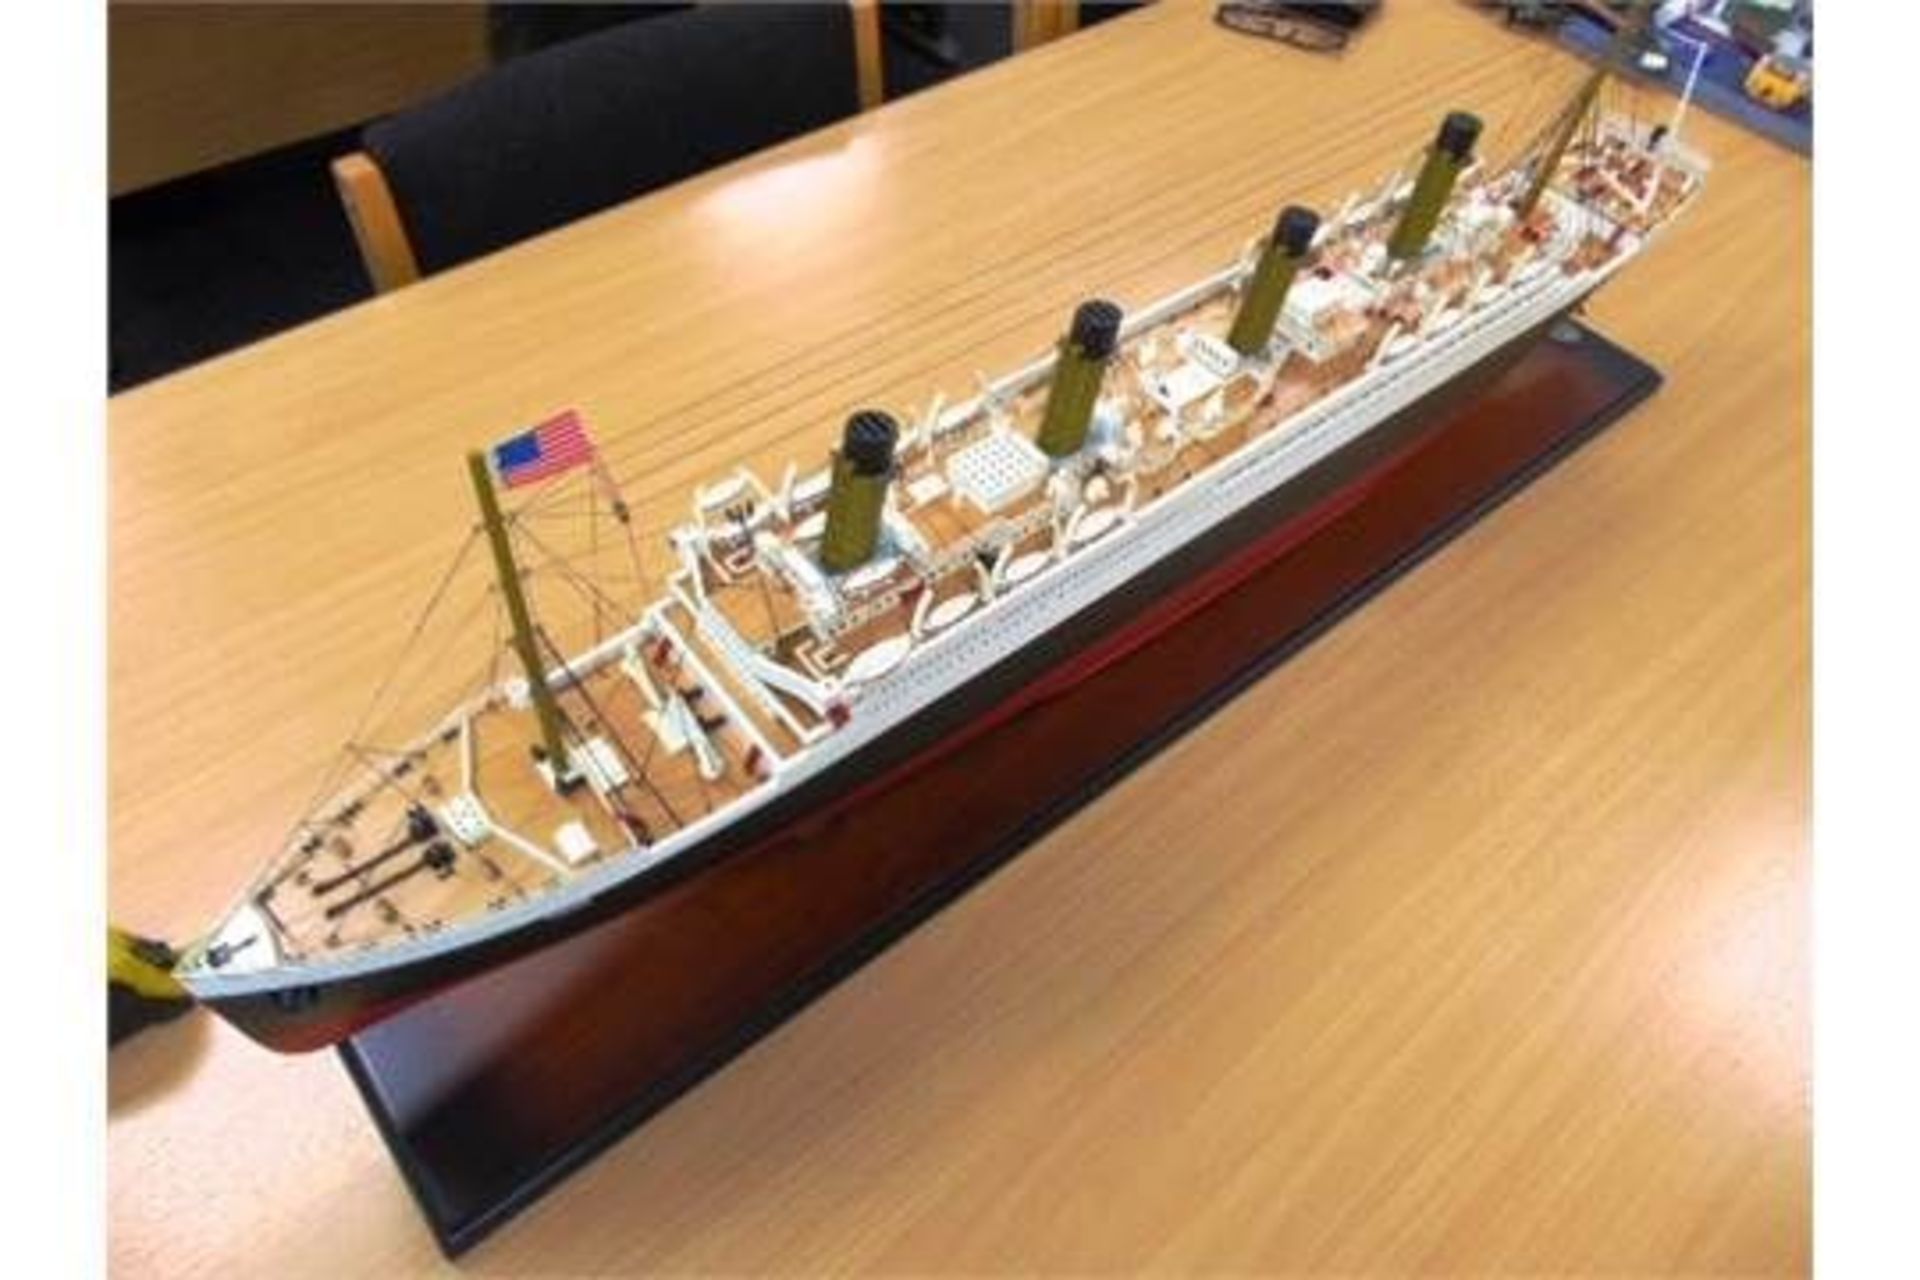 RMS TITANIC HIGHLY DETAILED WOOD SCALE MODEL - Image 5 of 11